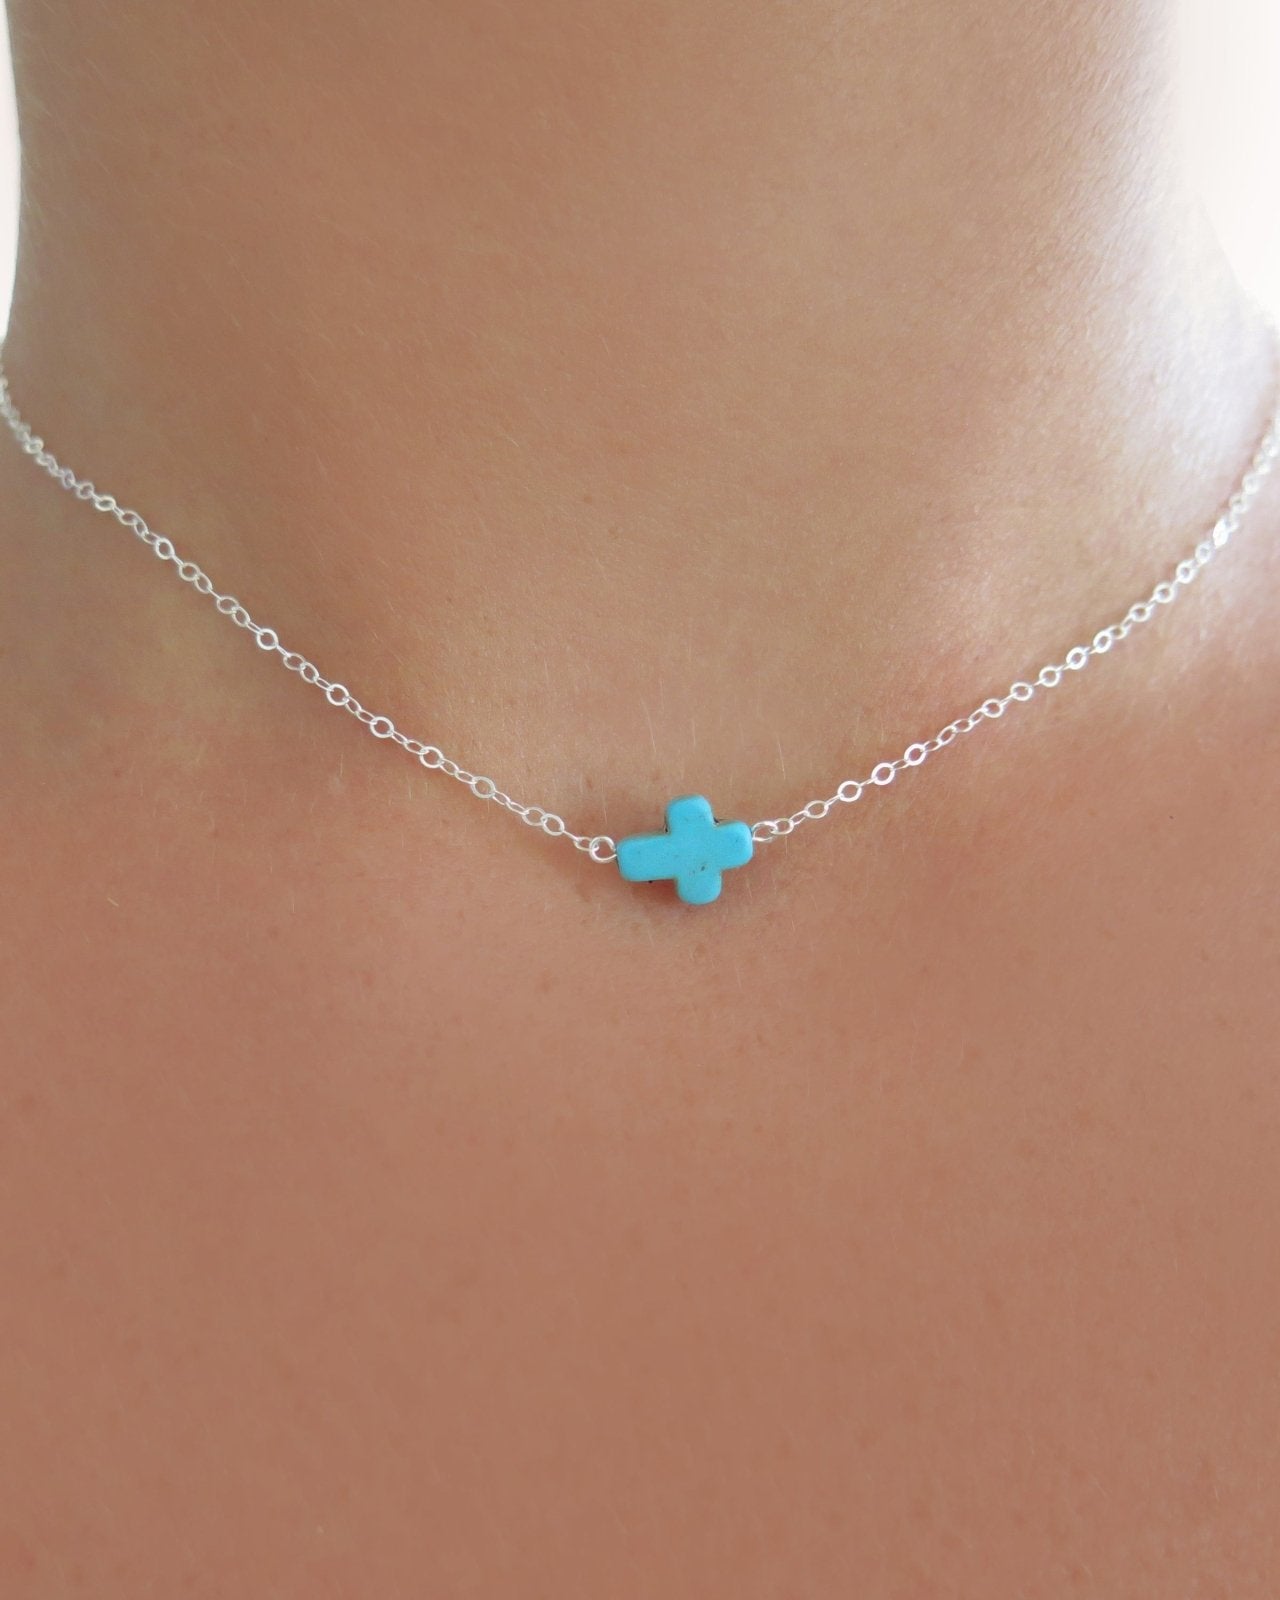 TURQUOISE CROSS CHOKER - The Littl - 14k Yellow Gold Fill - Deluxe Chain